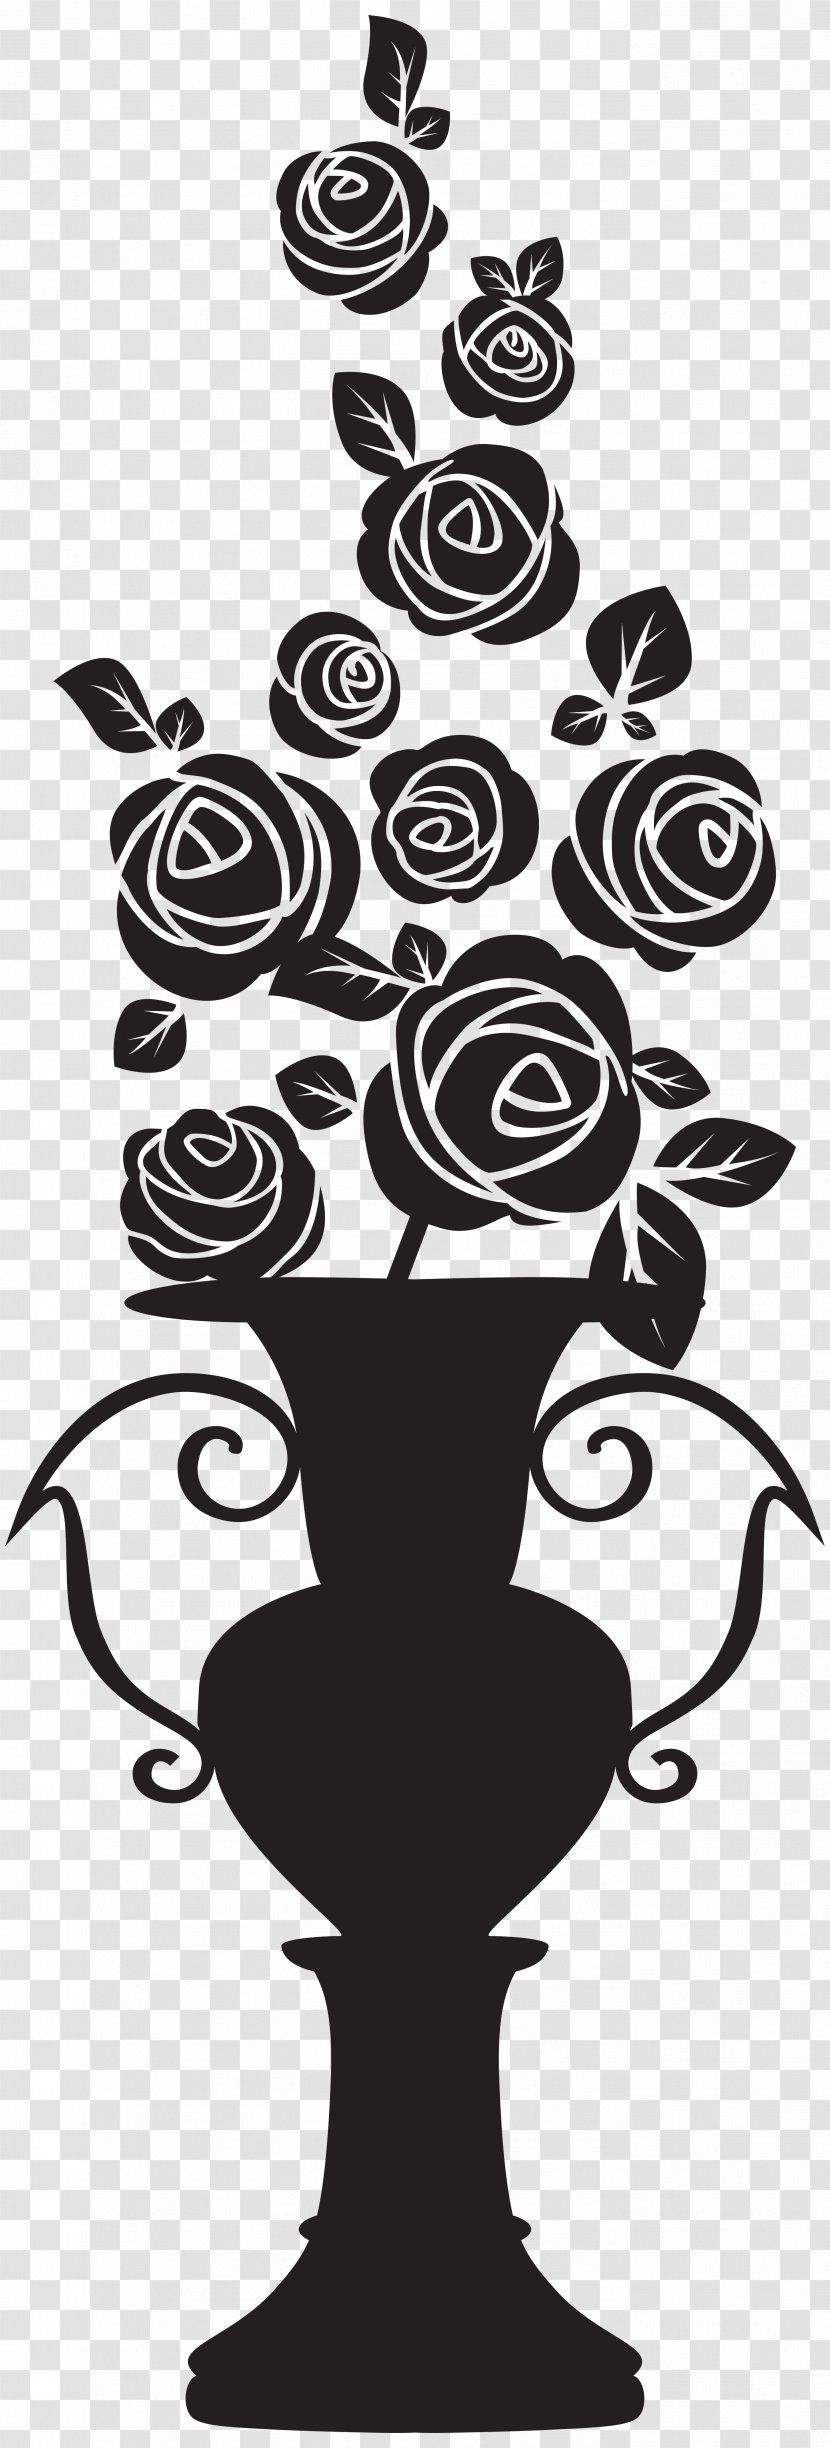 Silhouette Drawing Clip Art - Monochrome Photography - Vase With Roses Image Transparent PNG